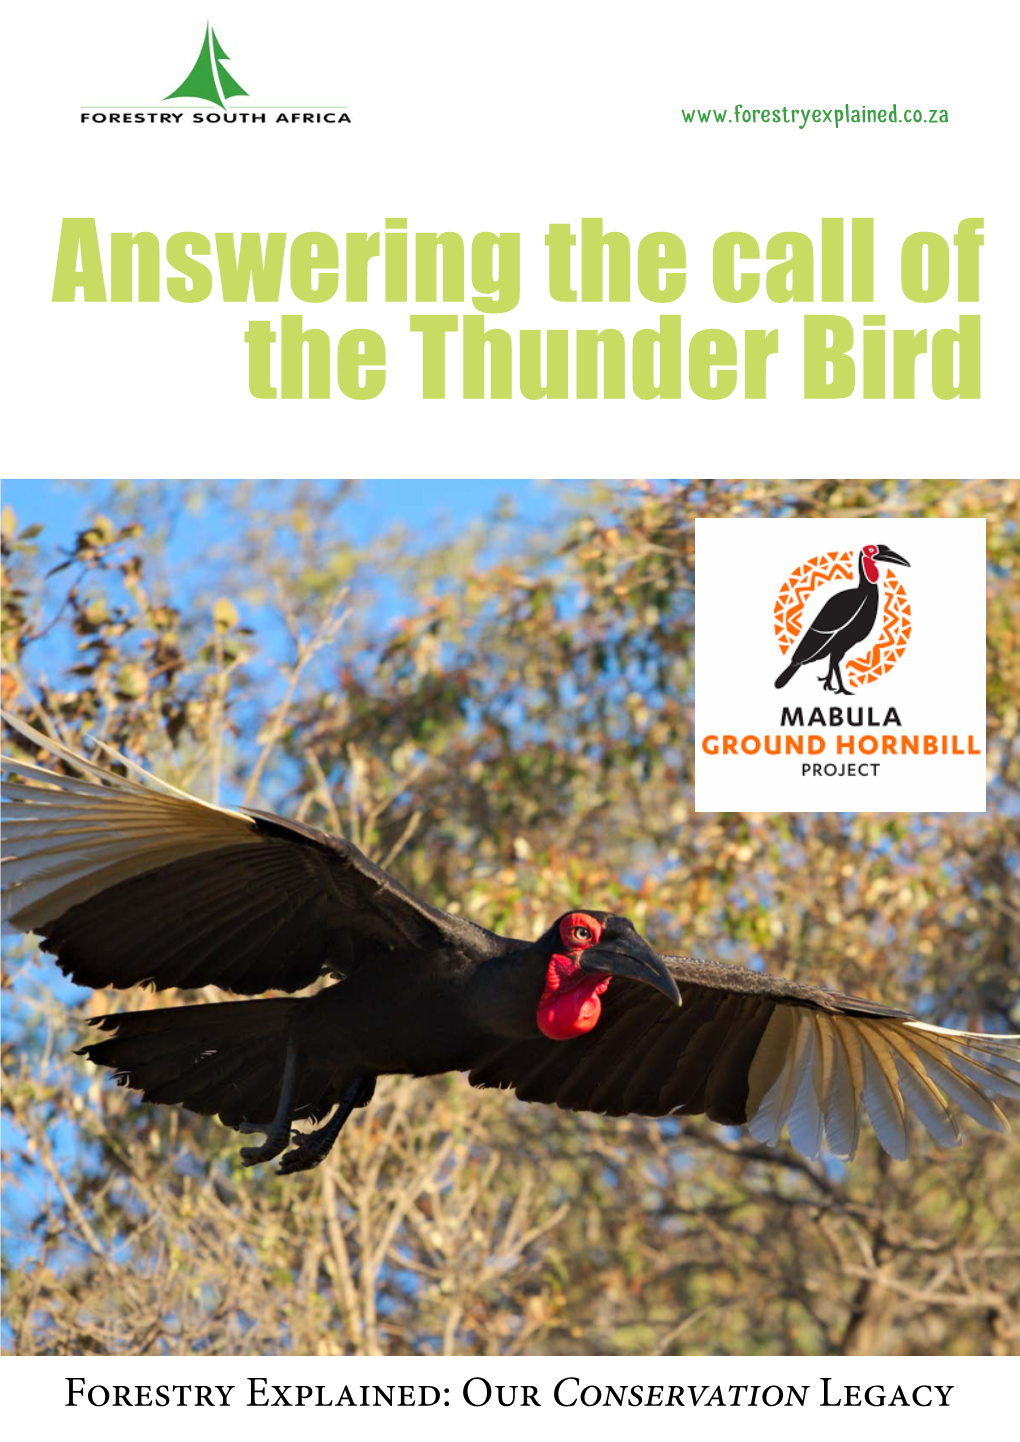 Answering the Call of the Thunder Bird